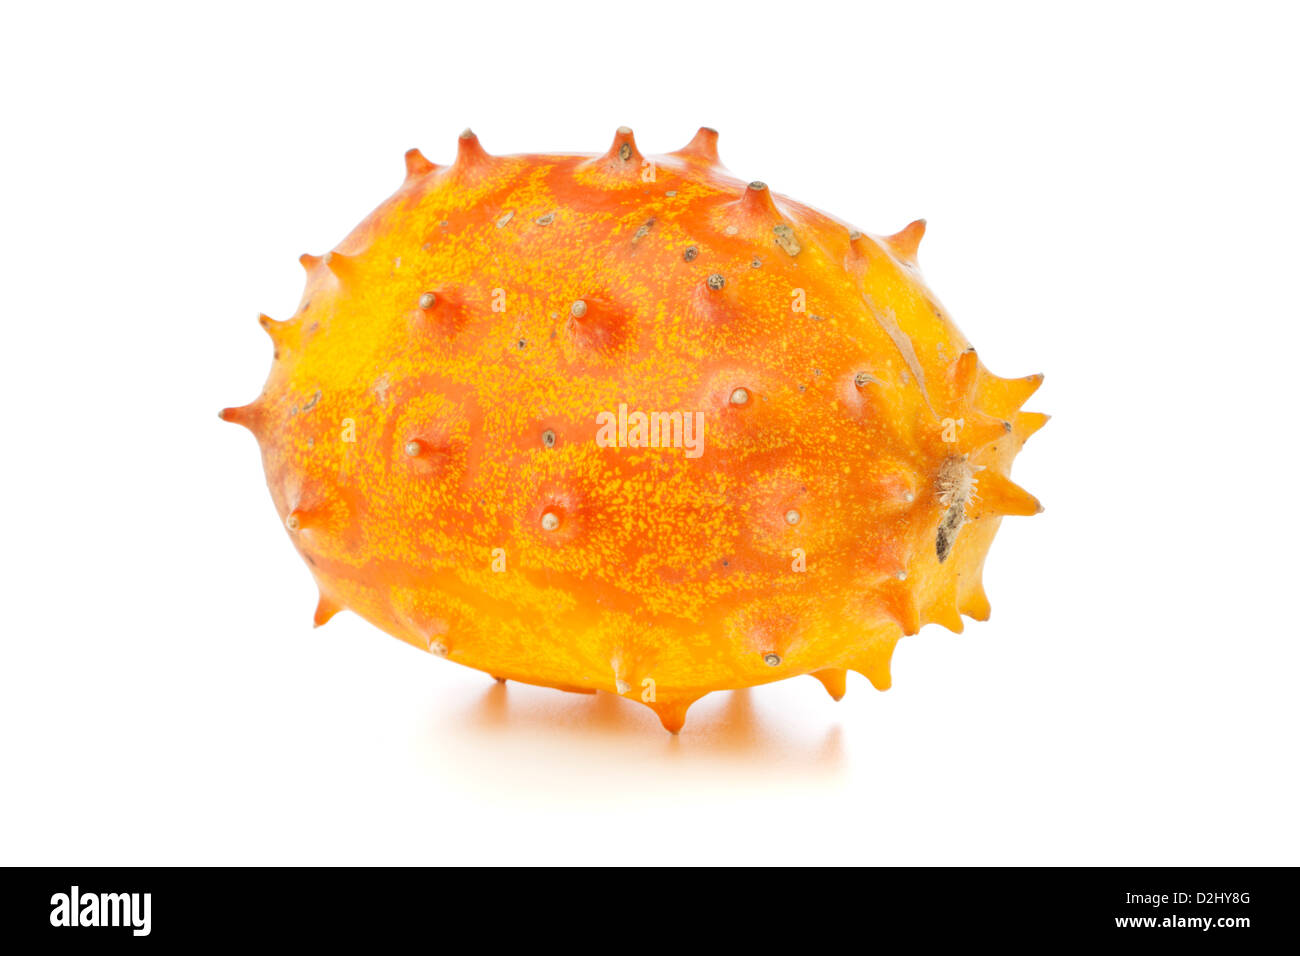 Kiwano fruit, also called African Horned melon or Horned Cucumber, isolated on white background Stock Photo